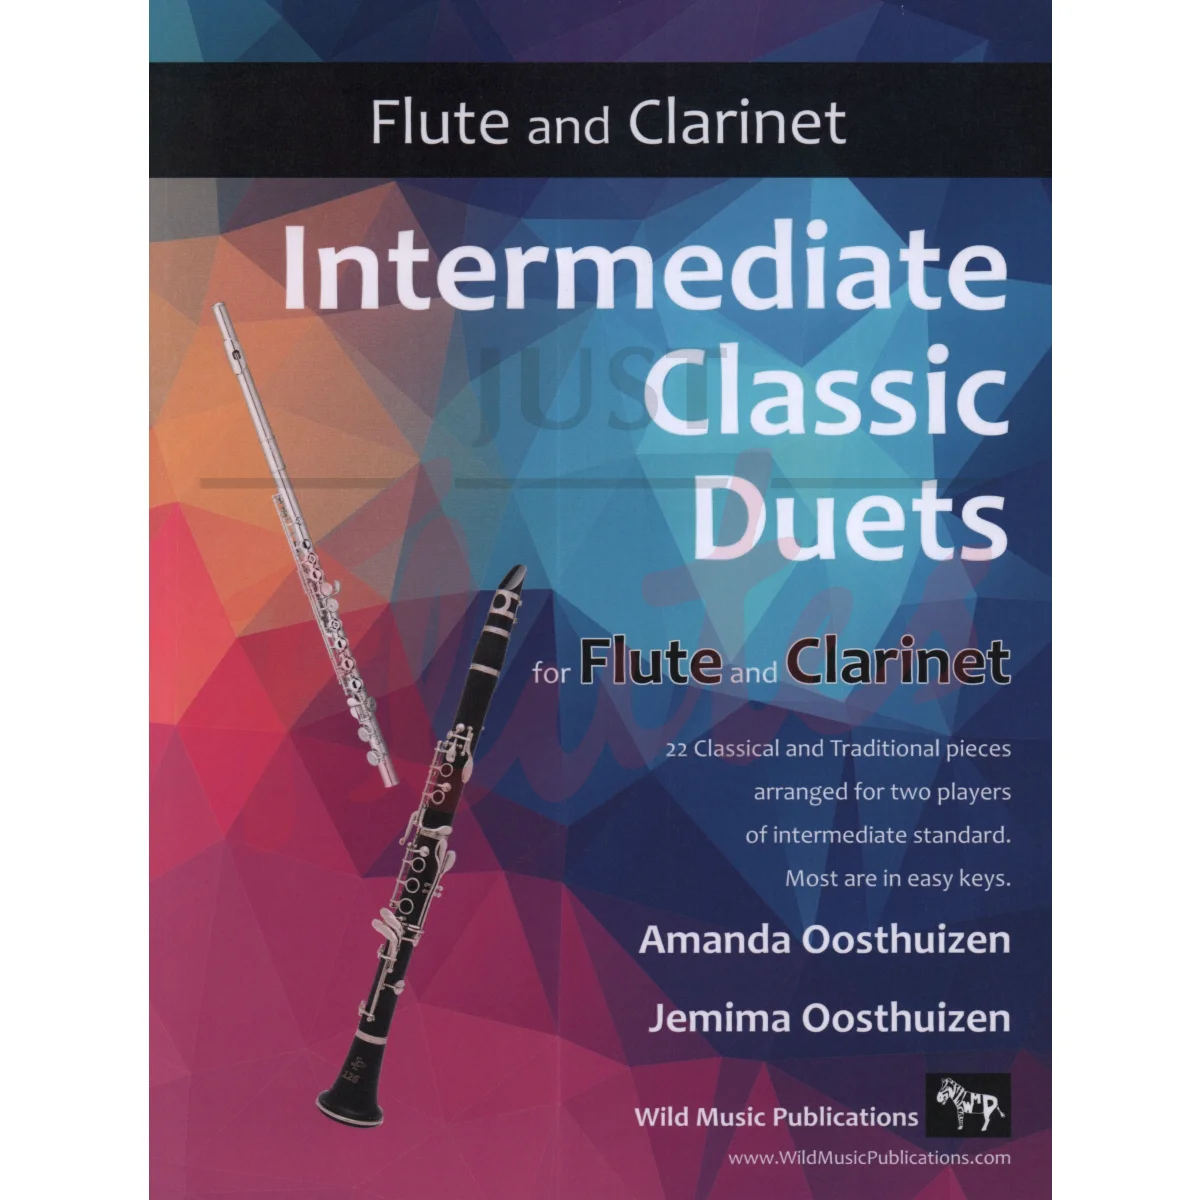 Intermediate Classic Duets for Flute and Clarinet